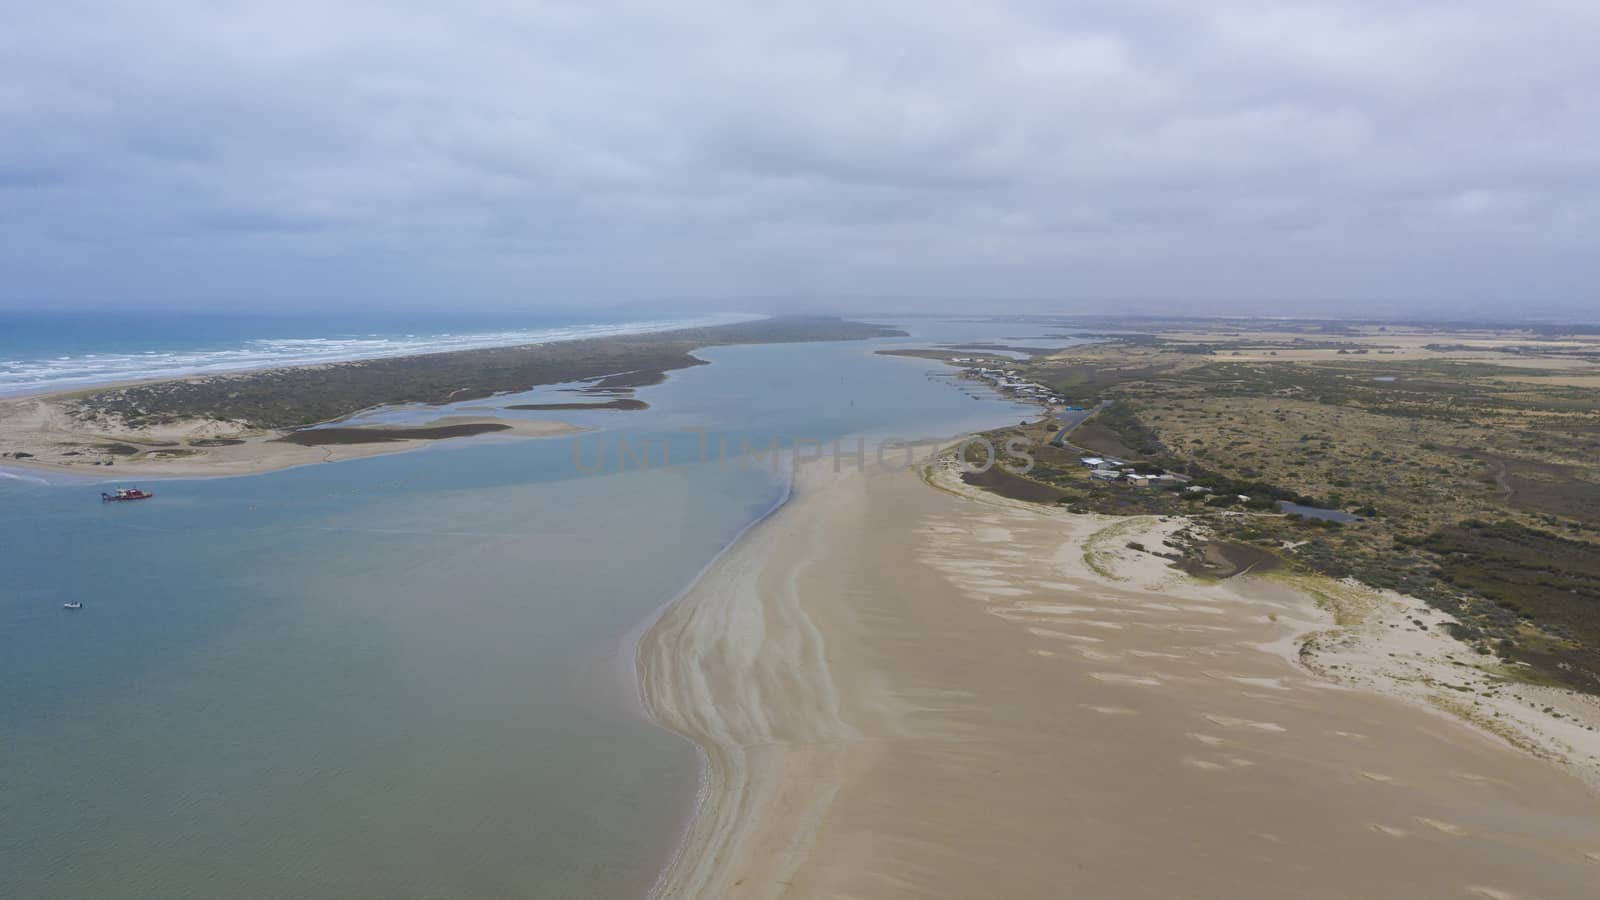 Aerial view of the mouth of the River Murray in regional South Australia in Australia by WittkePhotos